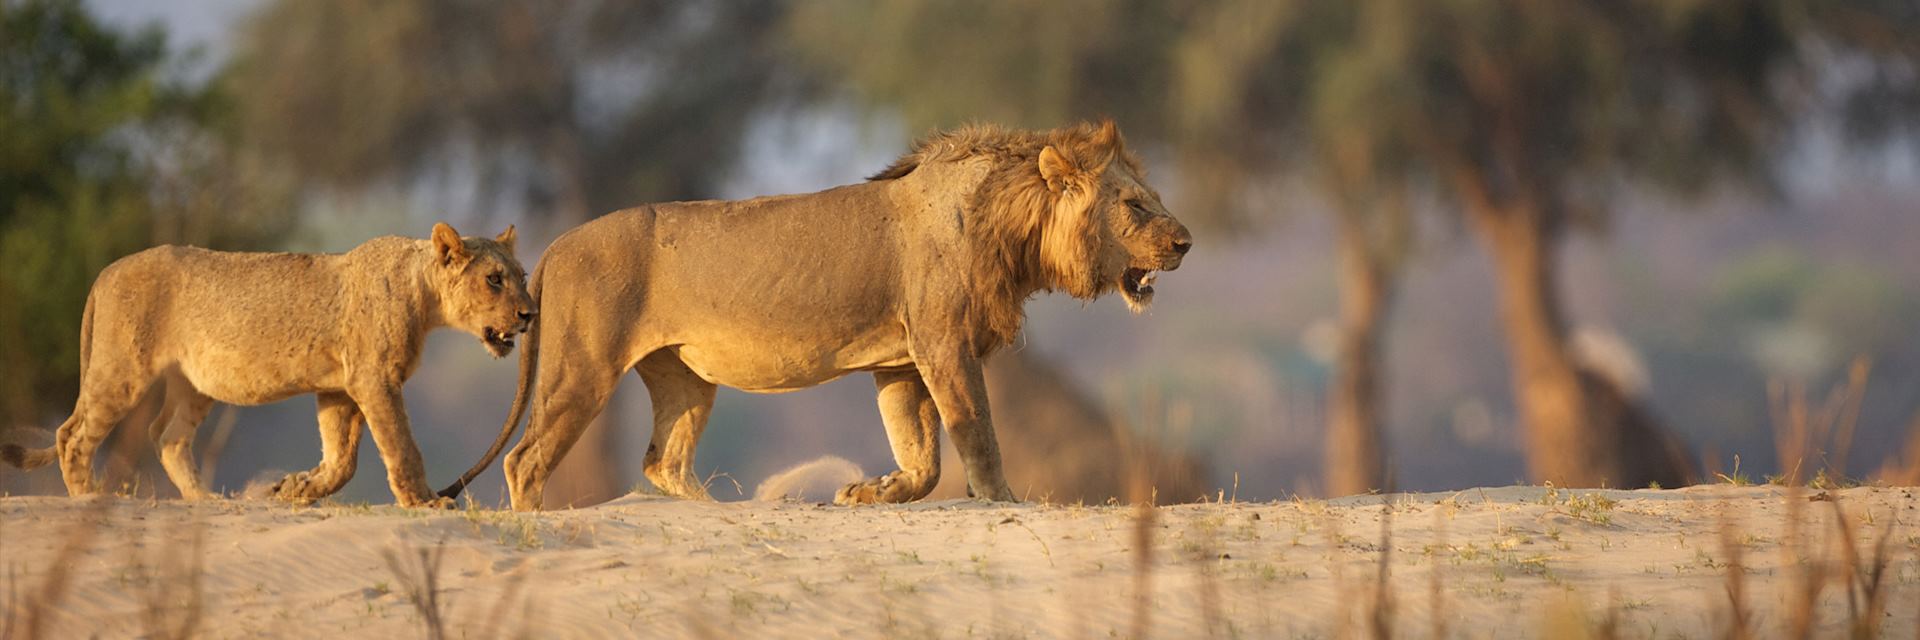 Lions in Mana Pools National Park